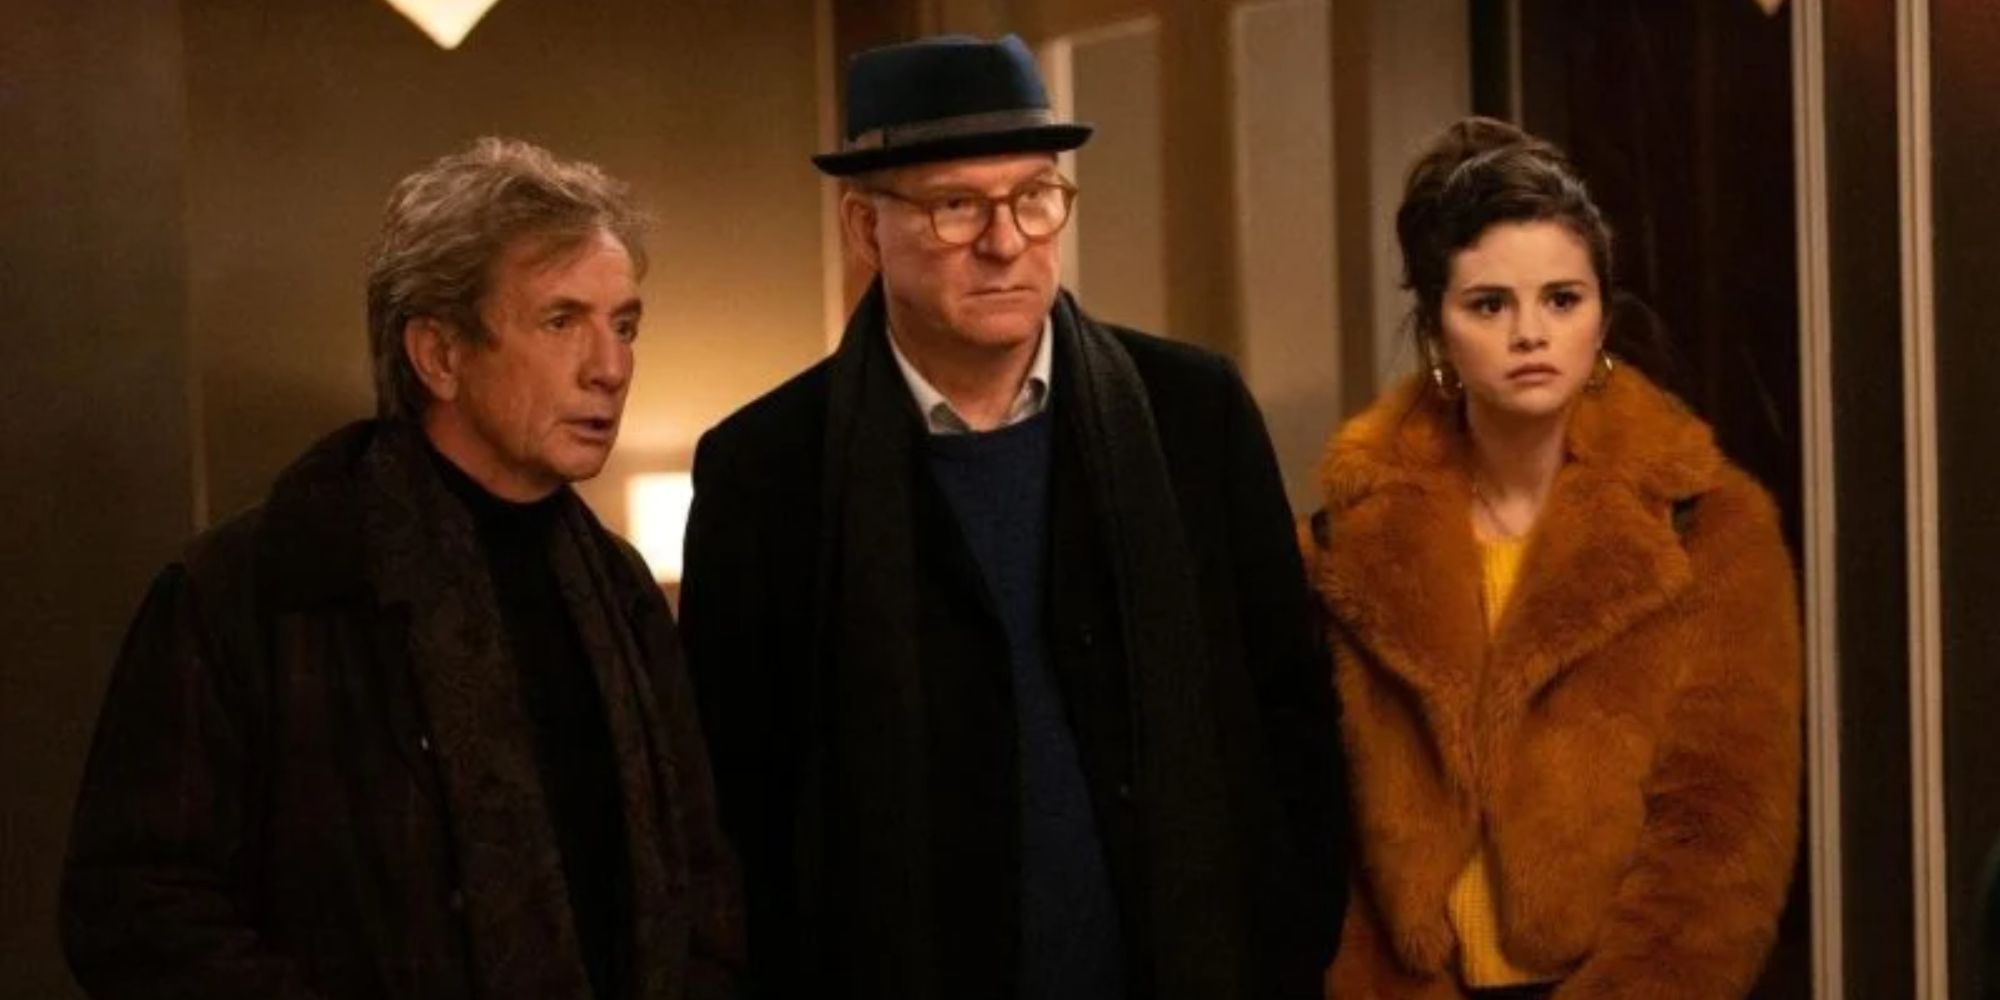 Martin Short, Steve Martin and Selena Gomez looking off to the side confused in 'Only Murderers in the Building'